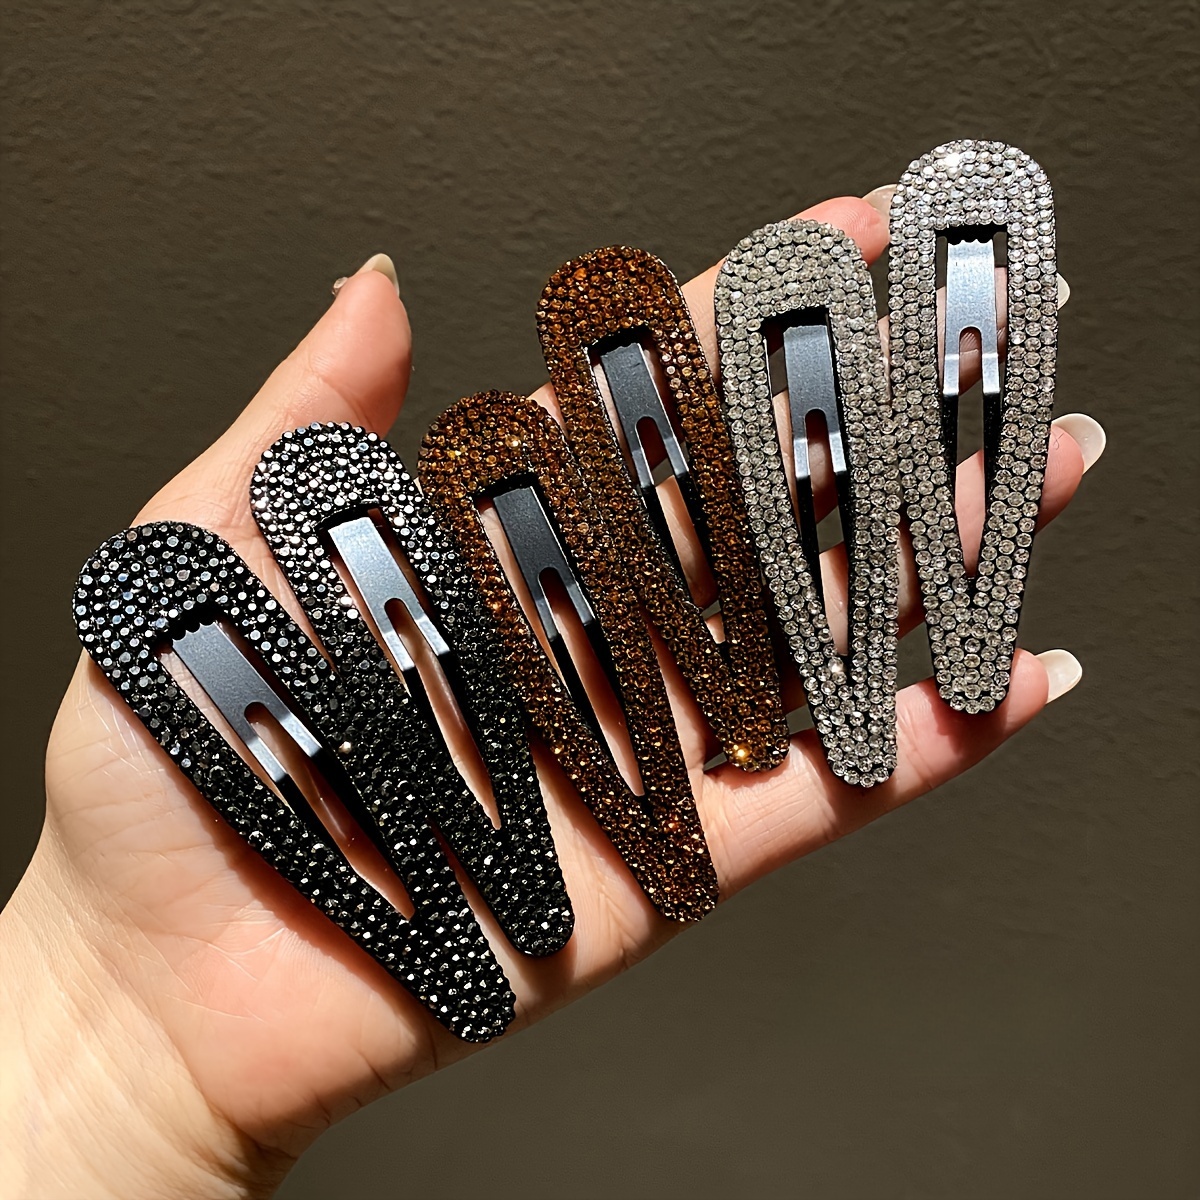 

6pcs Elegant Rhinestone Hair Clips For Women, Sparkling Hair Barrettes, Stylish Side Clips, Hair Accessories For Special Occasions